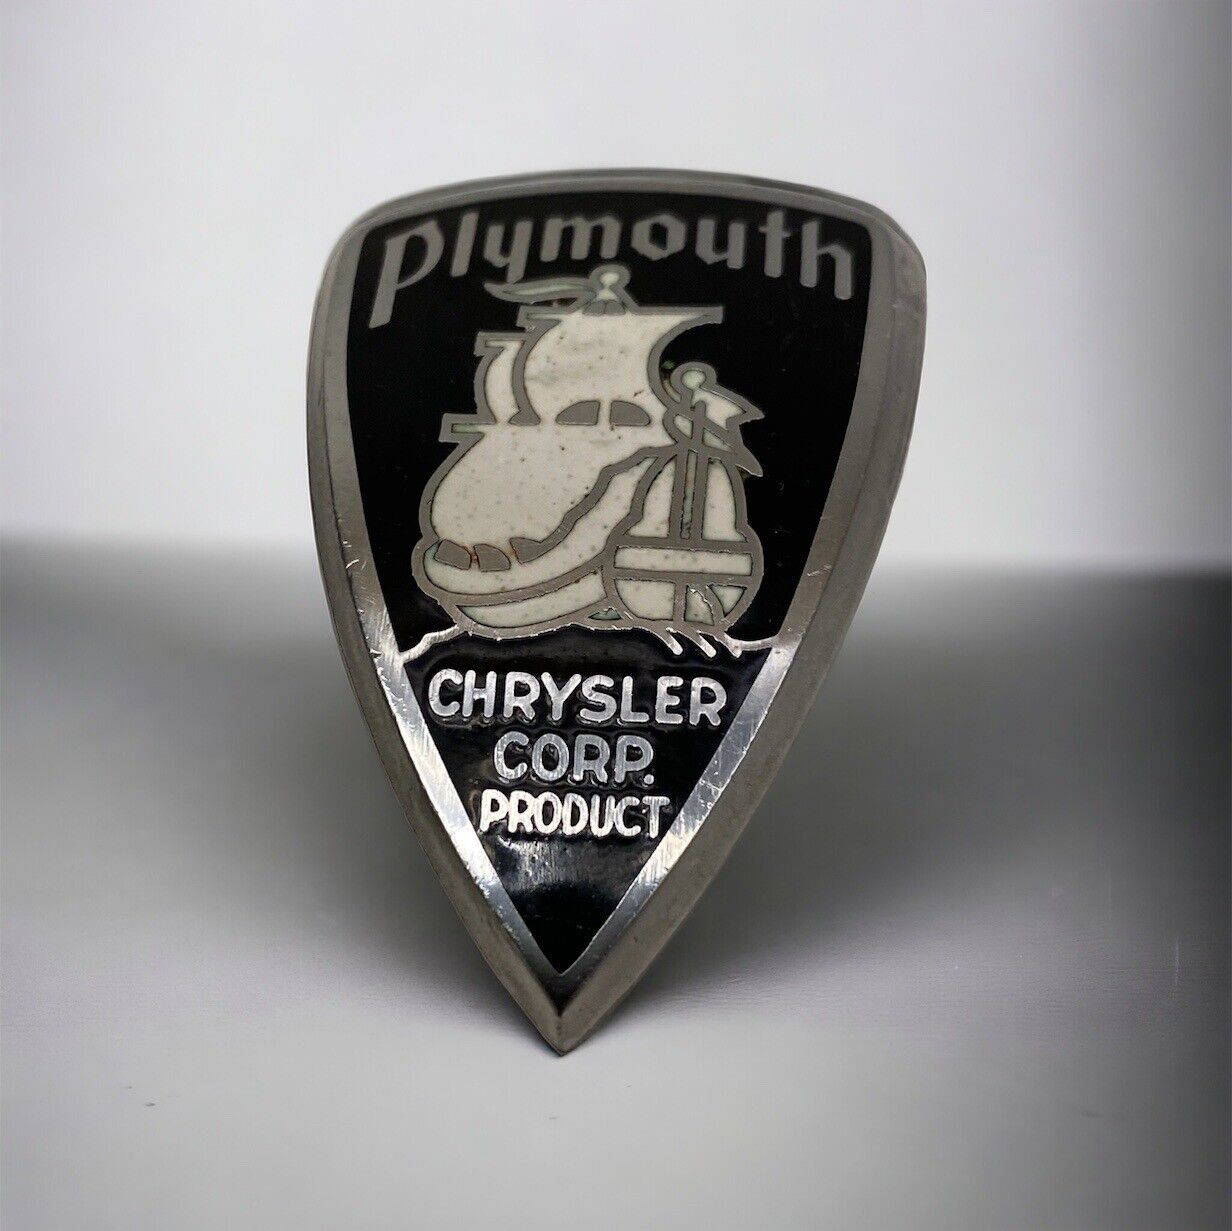 1931 Plymouth Radiator Shell Emblem Badge Curved Chrysler Corp Product 2 Pin 30s